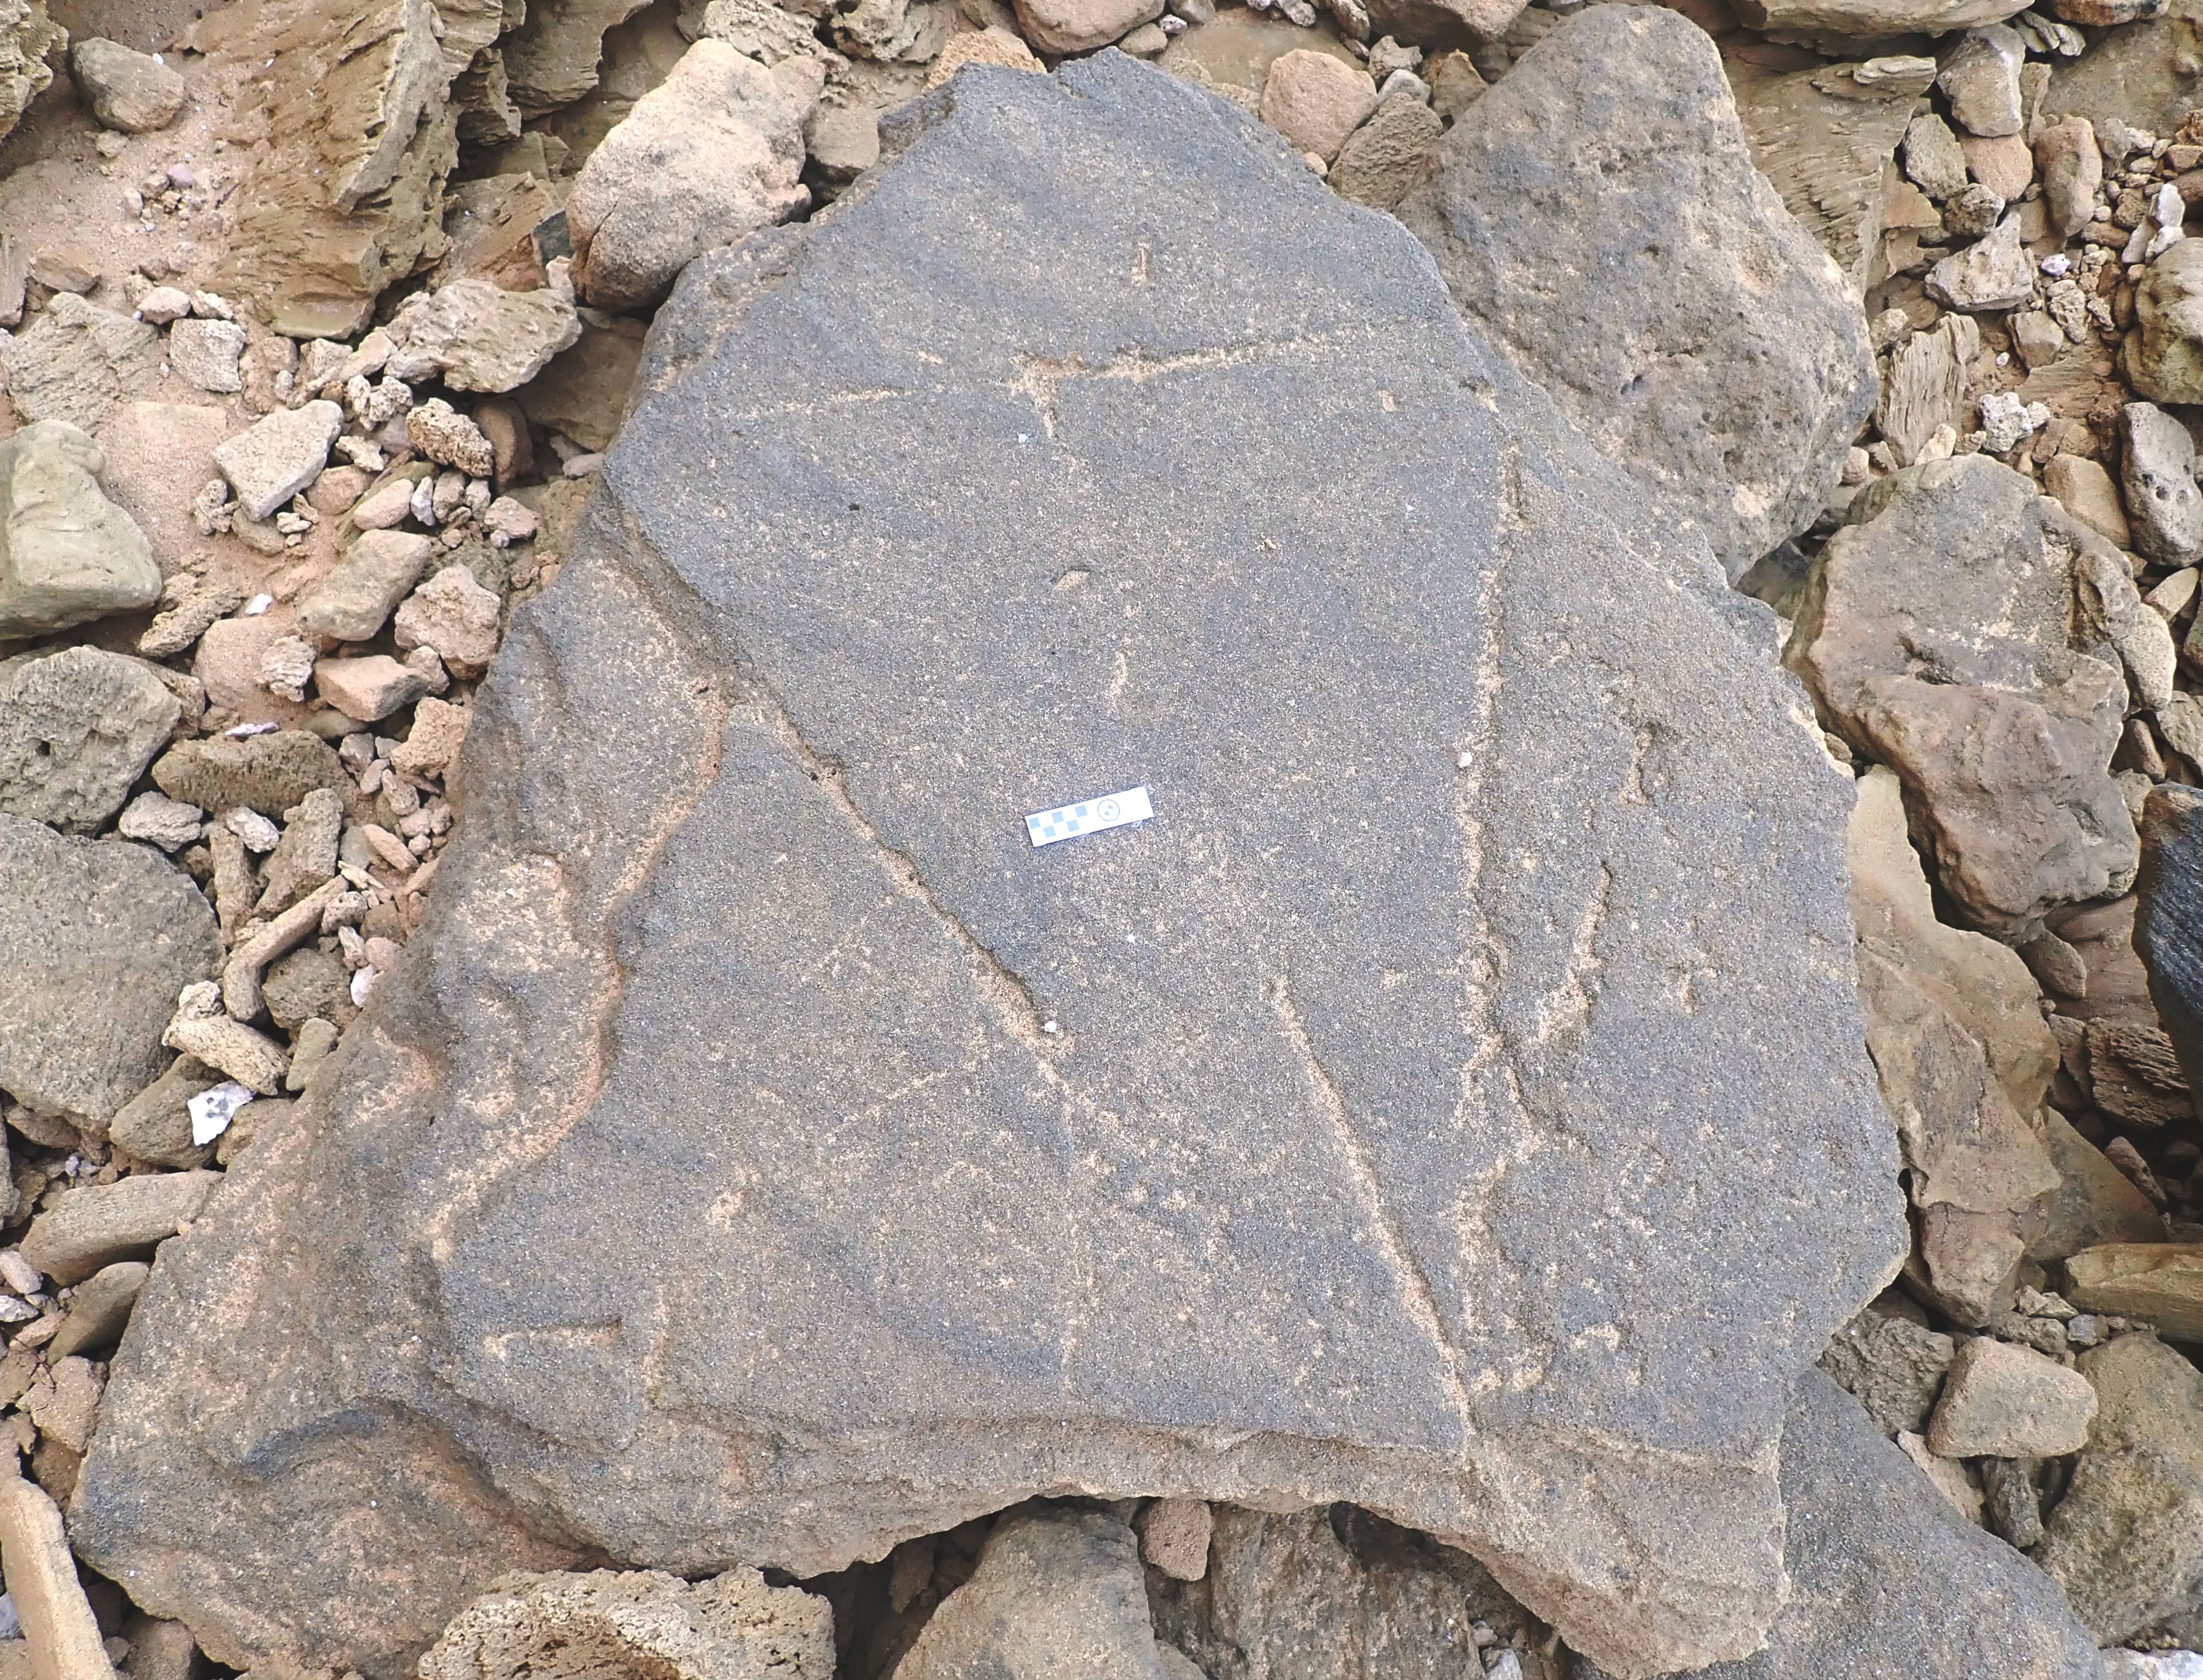 The larger of the two triangular geometric features (scale bar = 10 cm). Image: Charles Helm